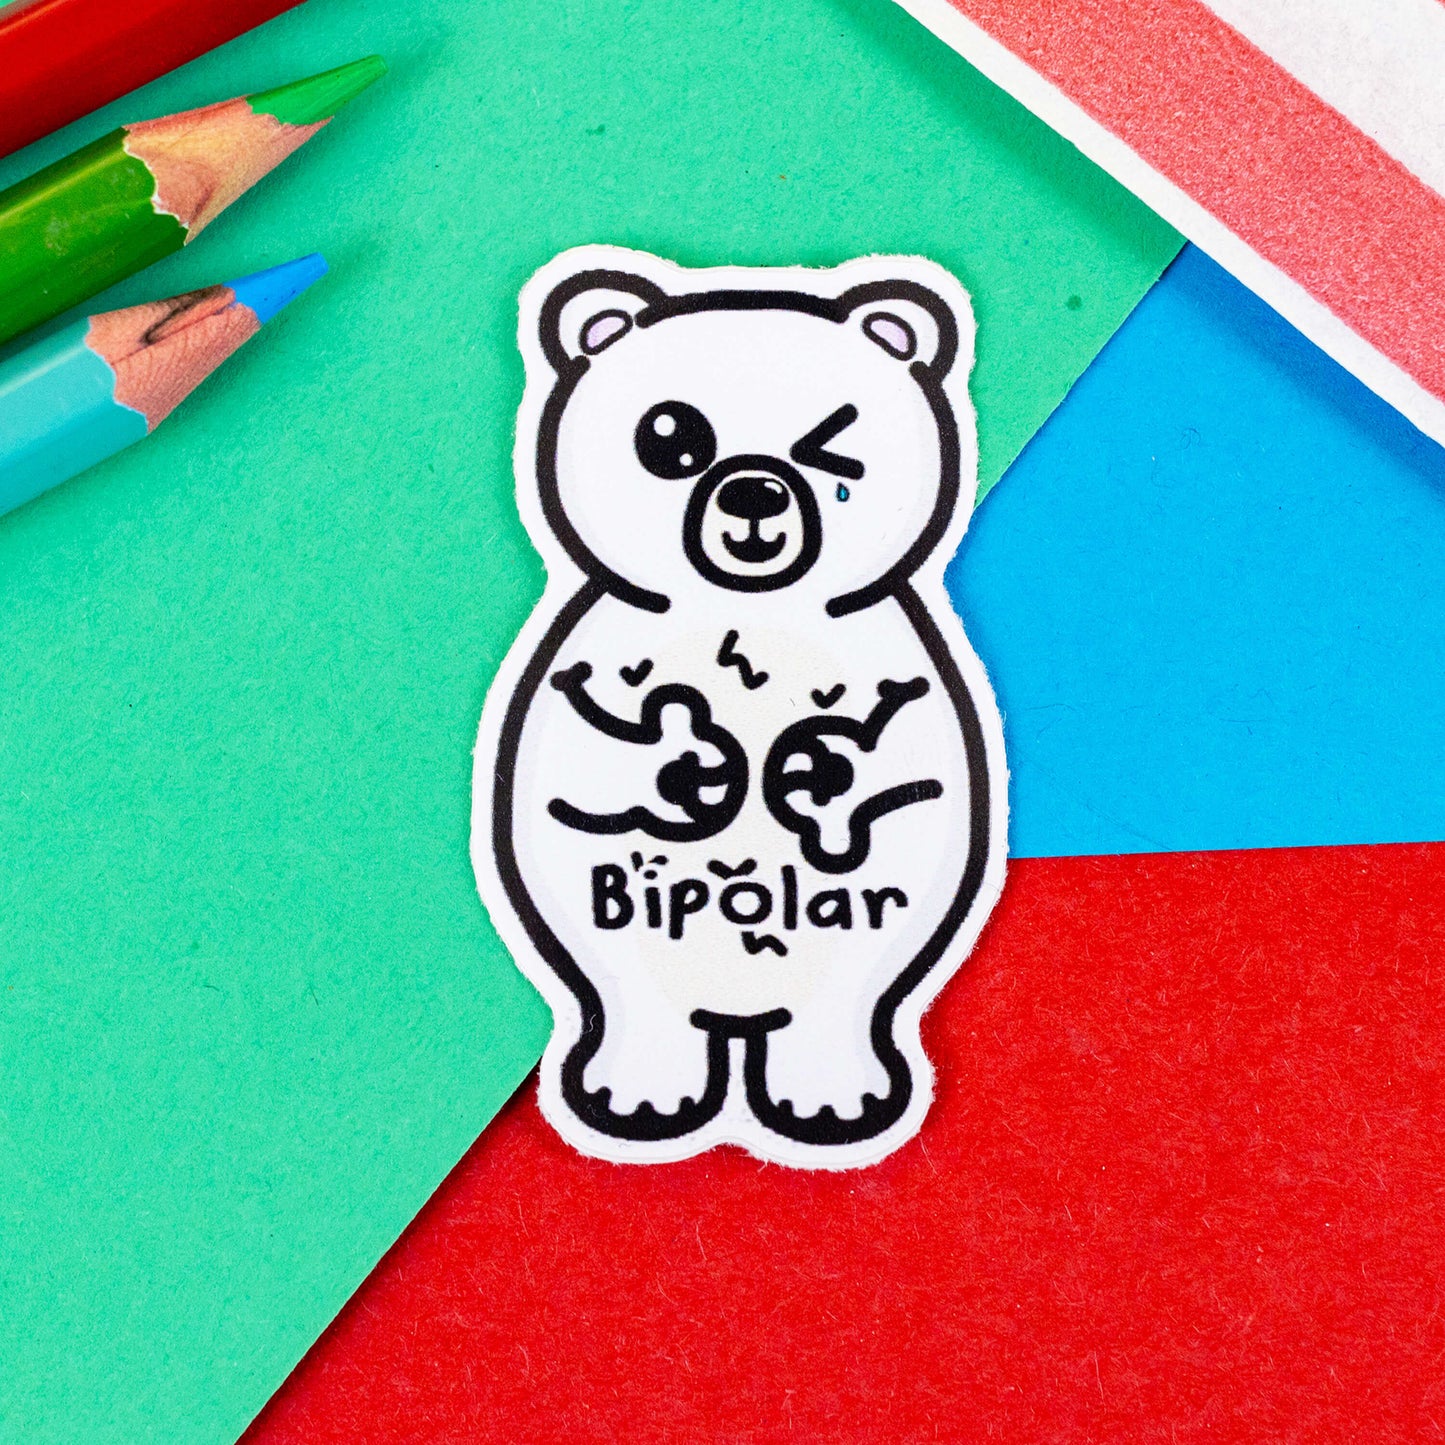 Bipolar Bear Sticker - Bipolar on a red, blue and green background with colouring pencils and a red stripe candy bag. The sticker is a white polar bear with one eye closed crying whilst smiling clutching its chest, across its tummy reads bipolar. The pun sticker is raising awareness for bipolar disorder.